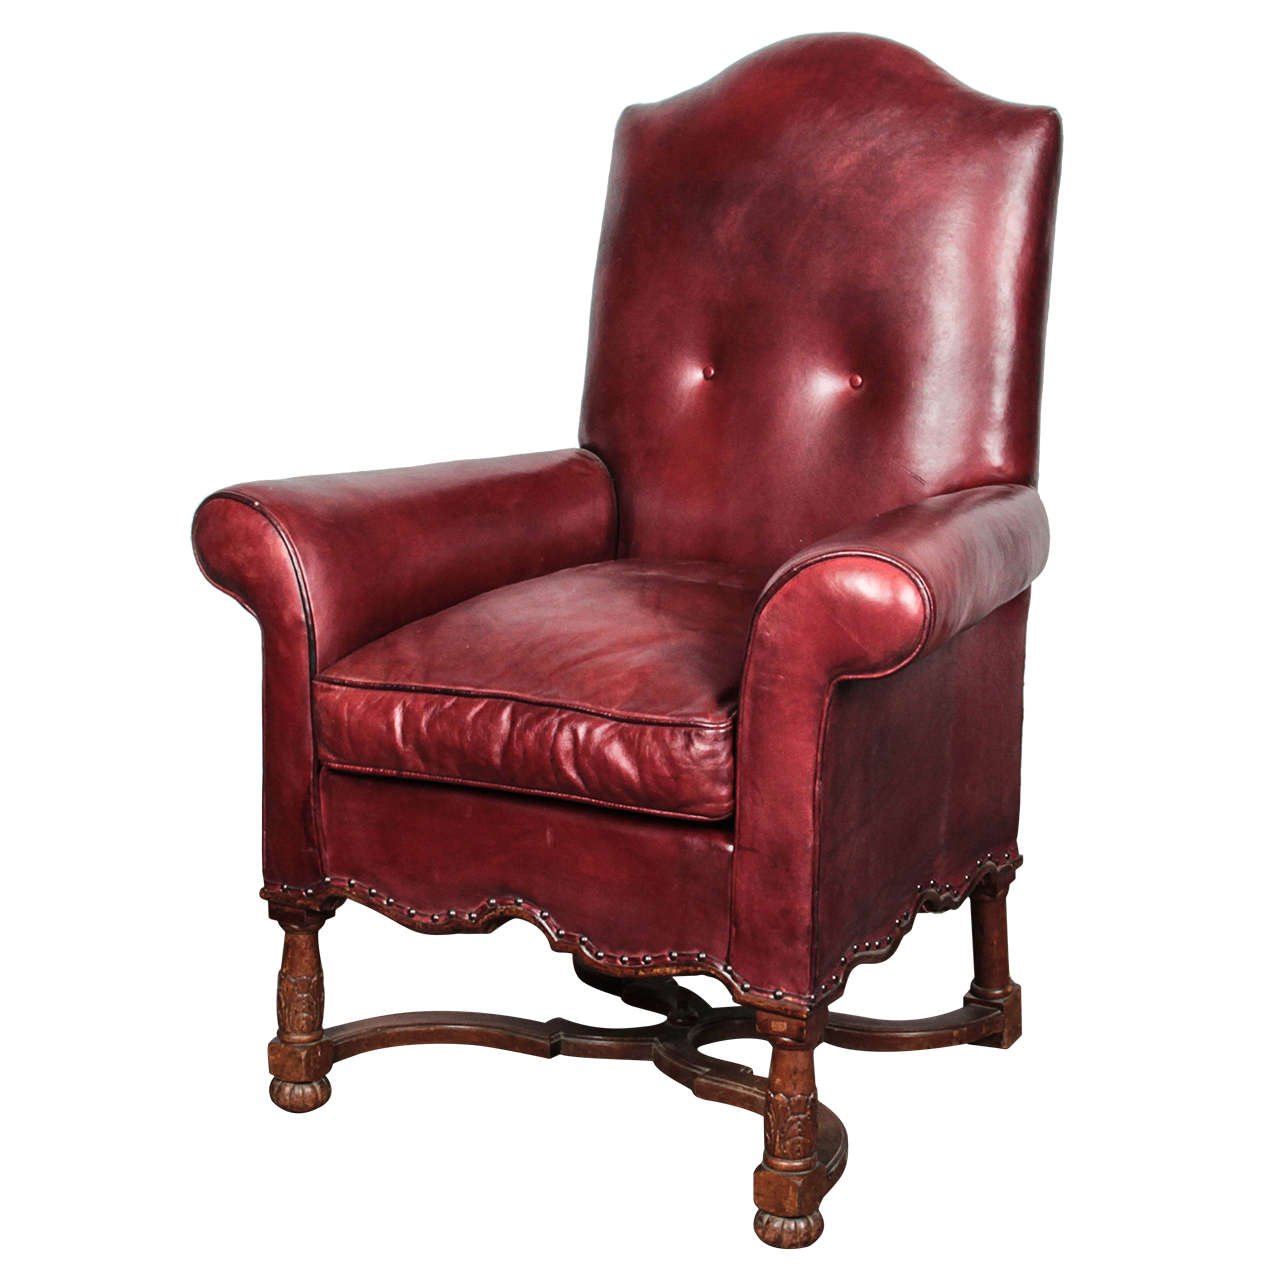 19th Century French Regence Style Leather Armchair For Sale